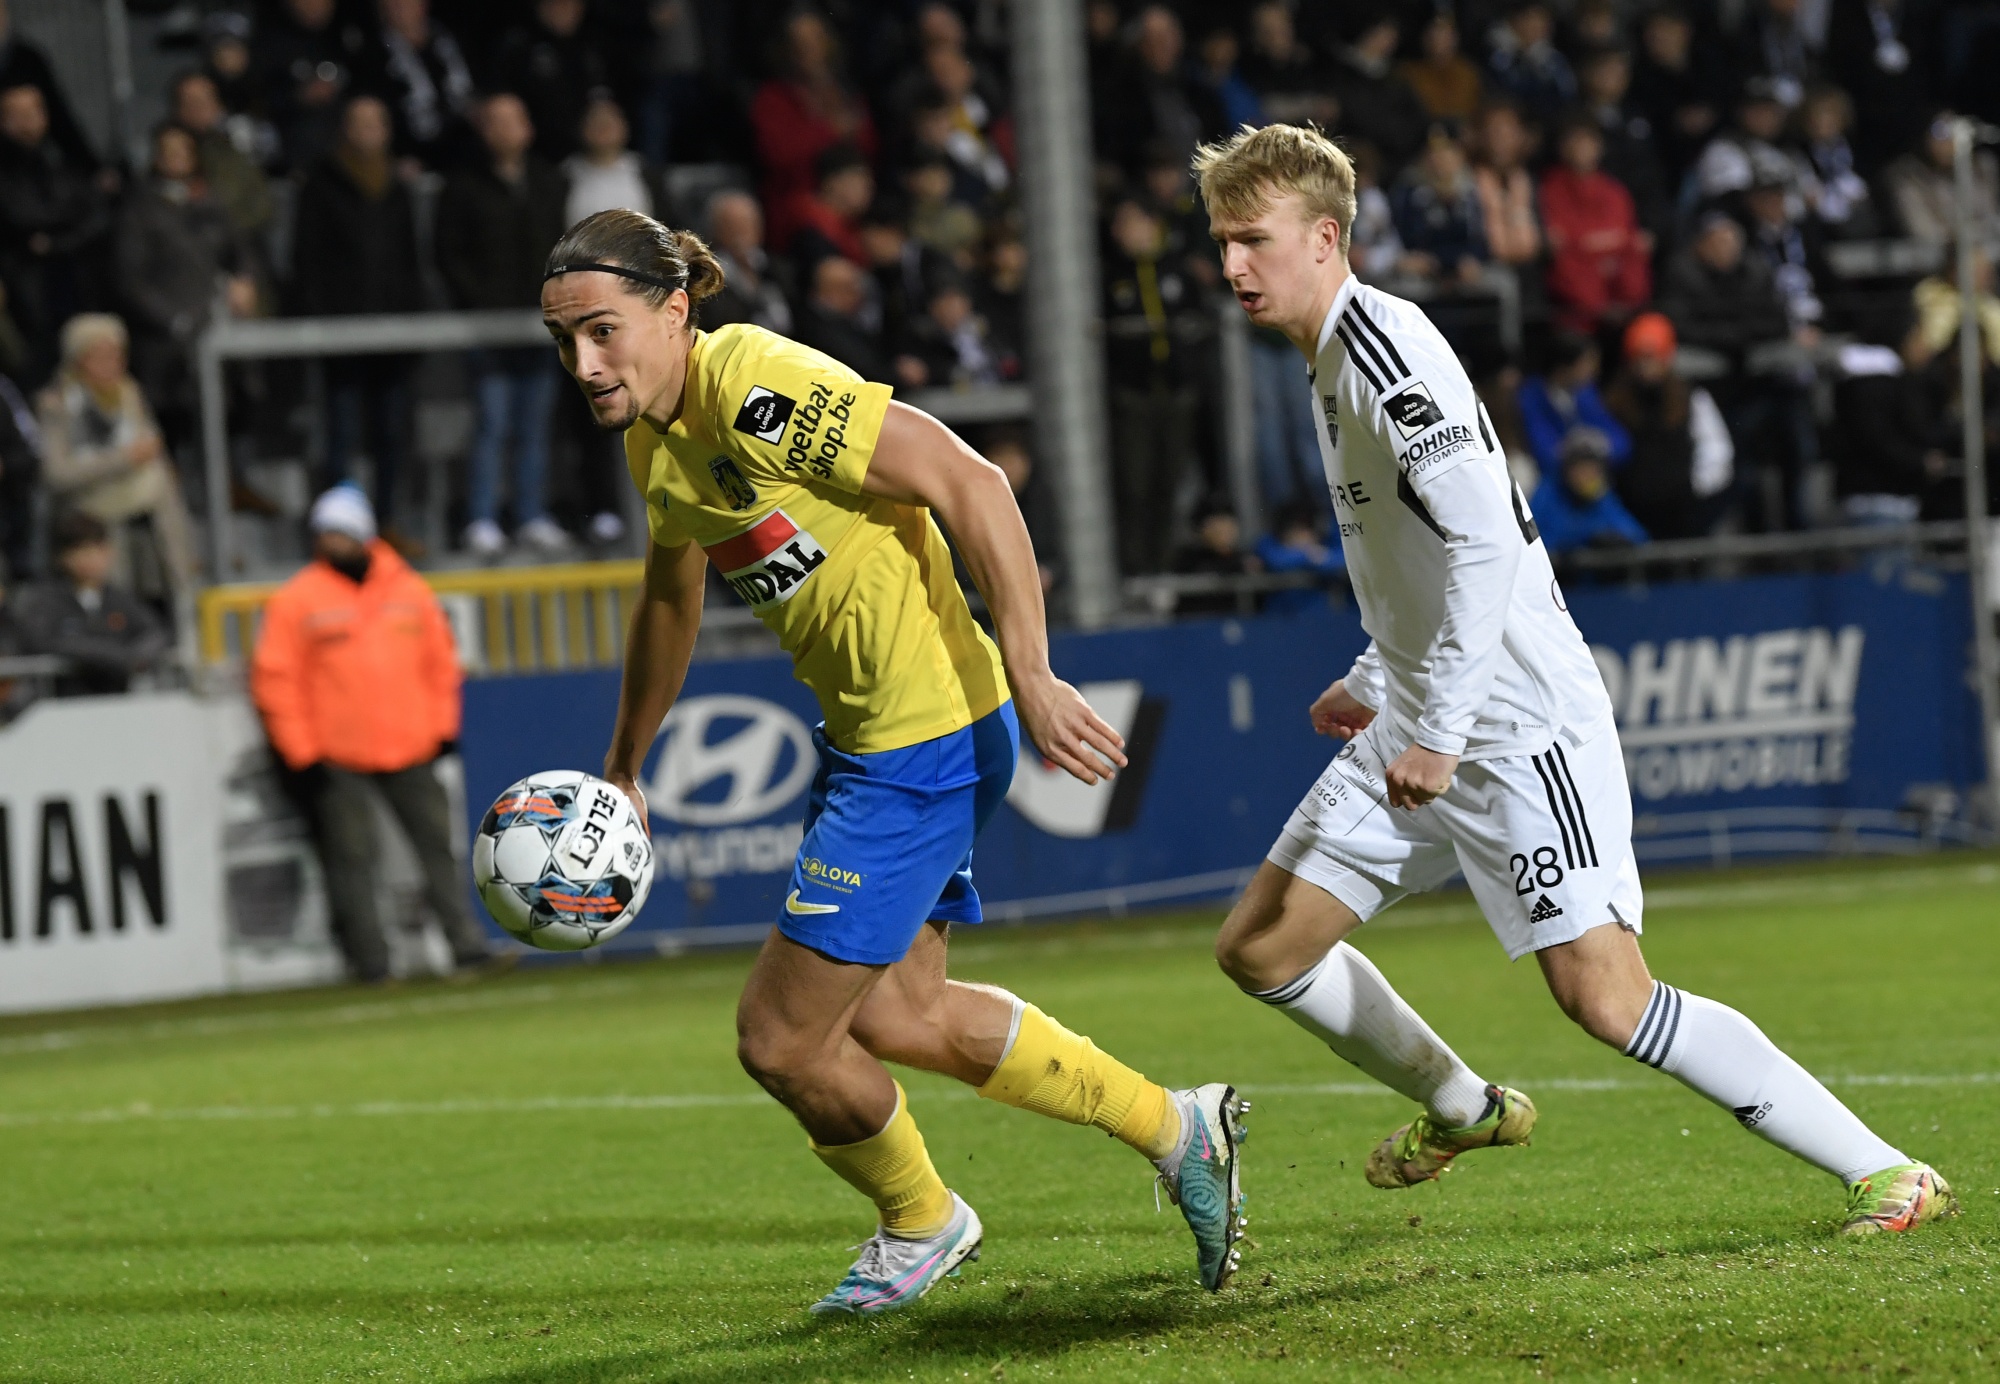 Westerlo's Mathias Fixelles and Eupen's Rune Paeshuyse fight for the ball during a soccer match between KAS Eupen and KVC Westerlo, Saturday 04 February 2023 in Eupen, on day 24 of the 2022-2023 'Jupiler Pro League' first division of the Belgian championship. BELGA PHOTO JOHN THYS